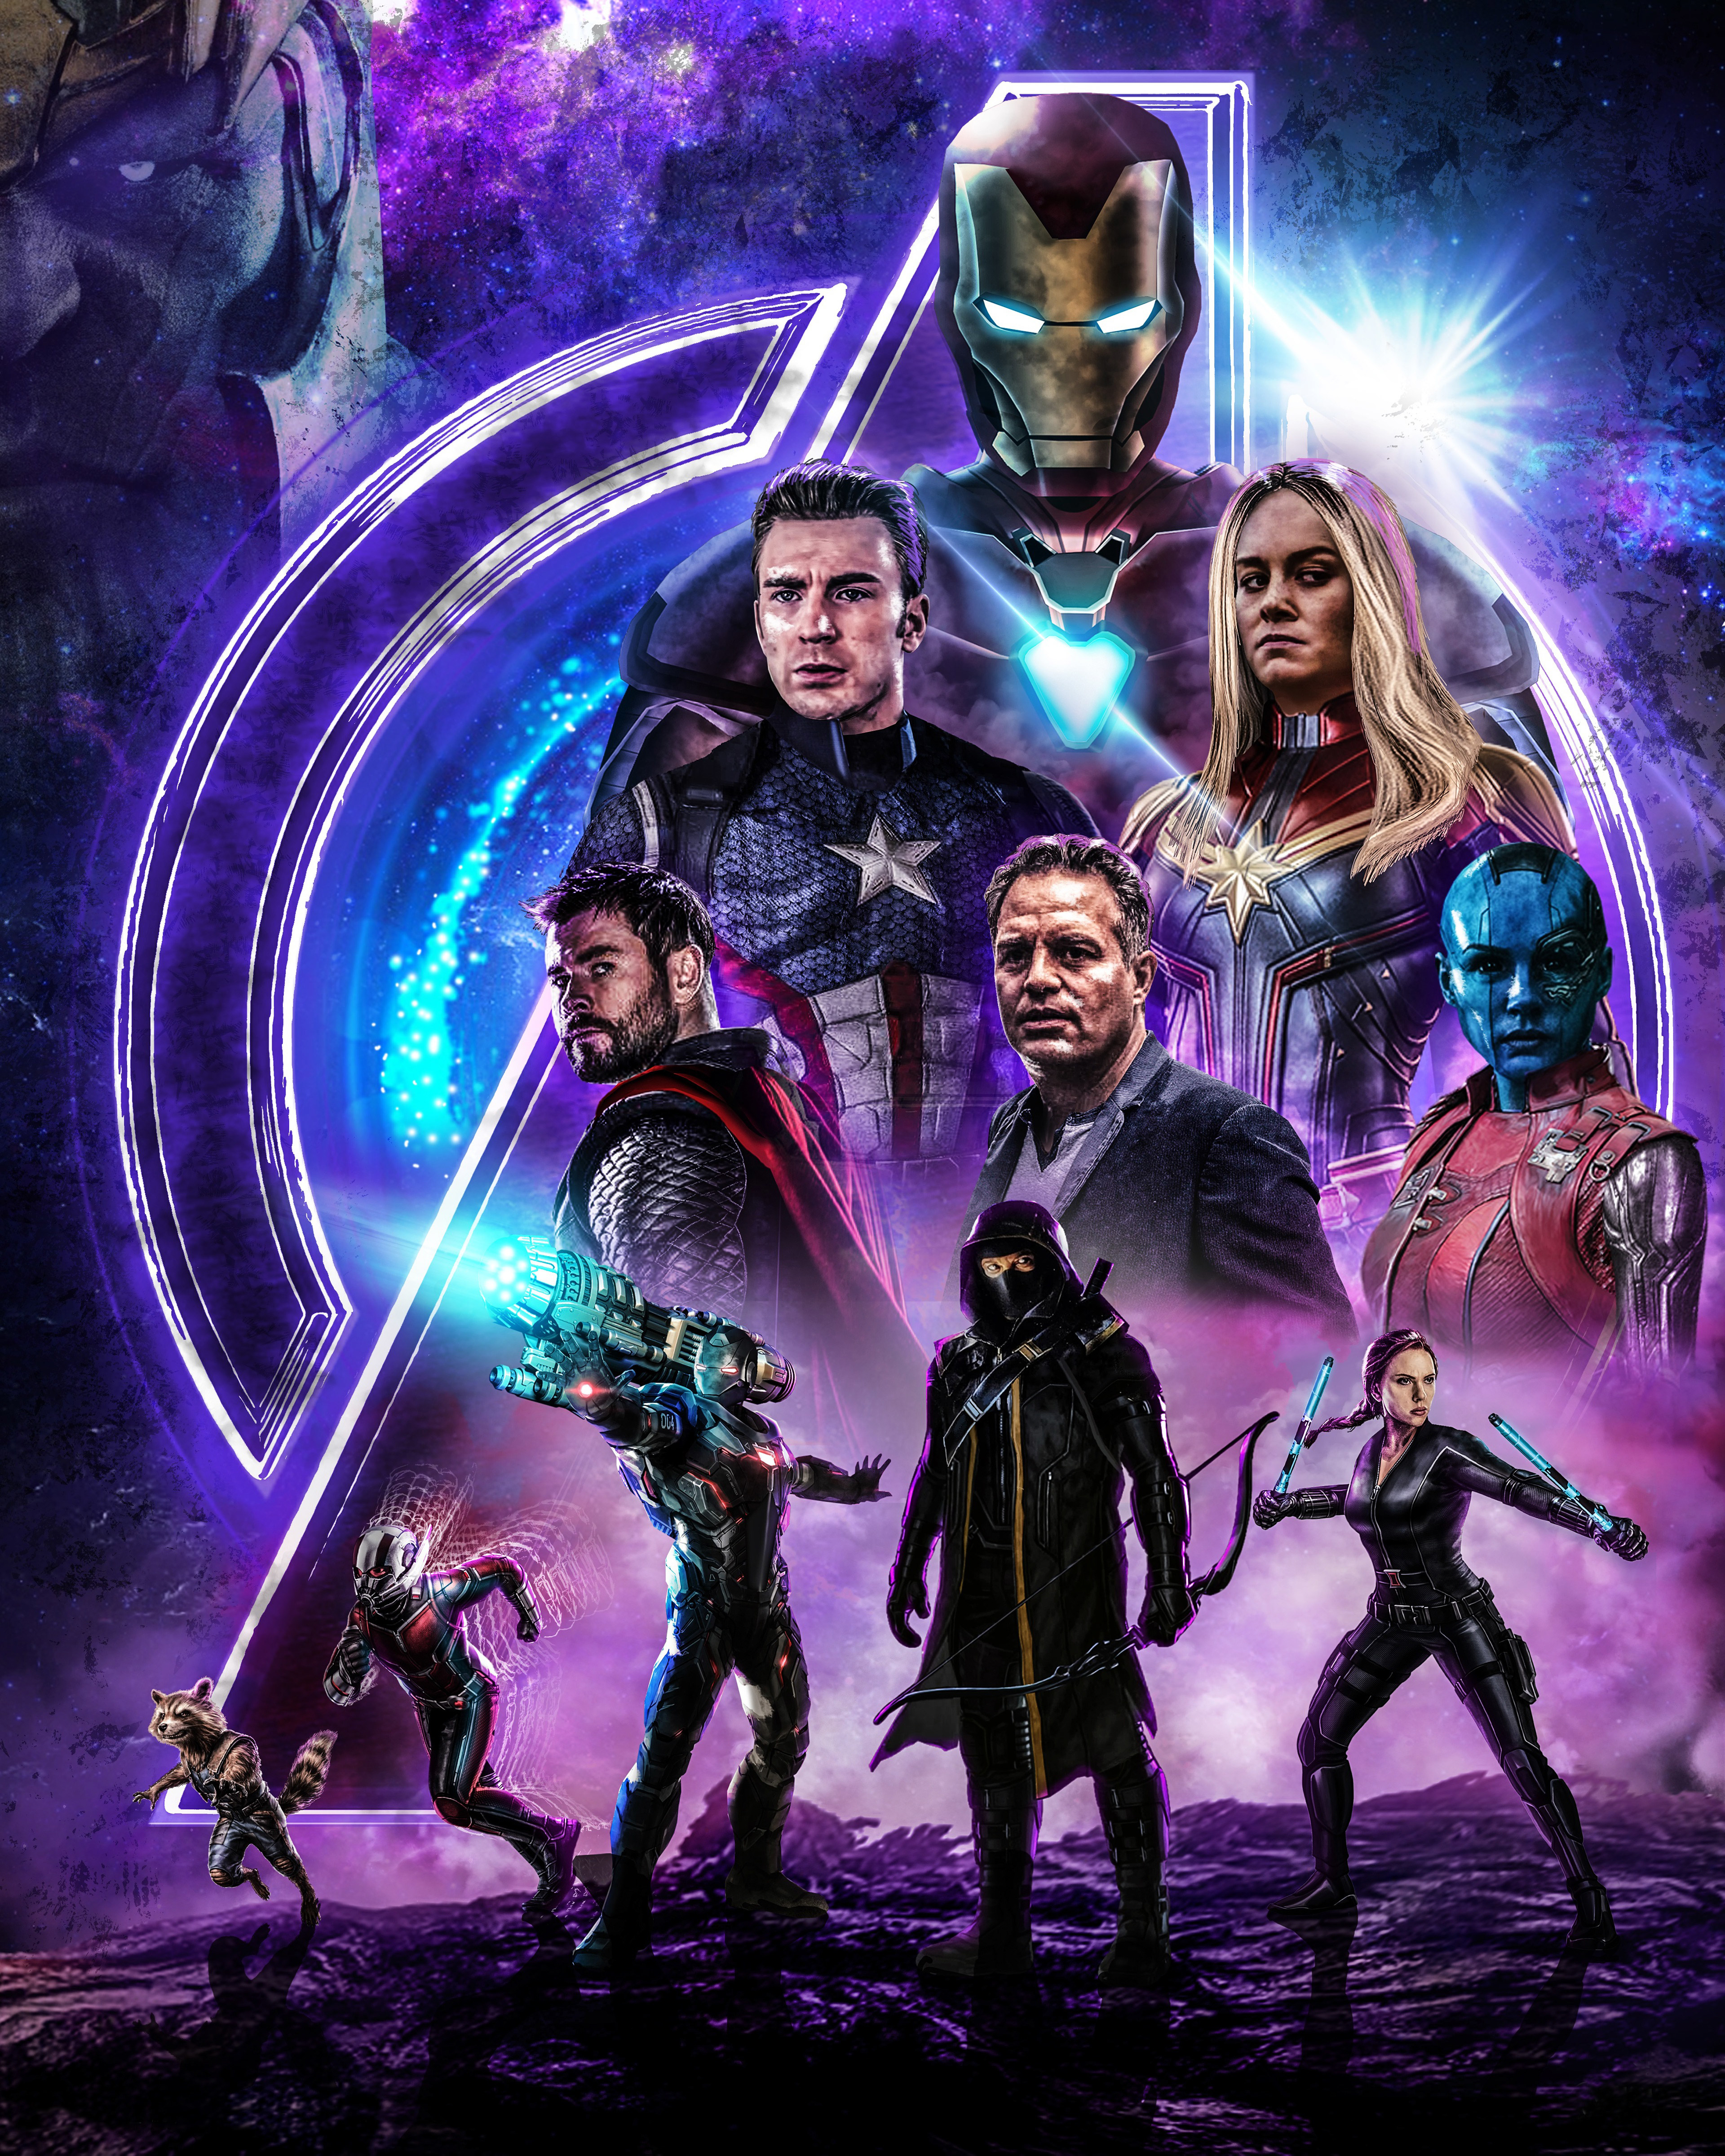 Avengers Endgame / Avengers: Endgame | Blu-ray | Free shipping over £20 | HMV ... - I have to say that it.